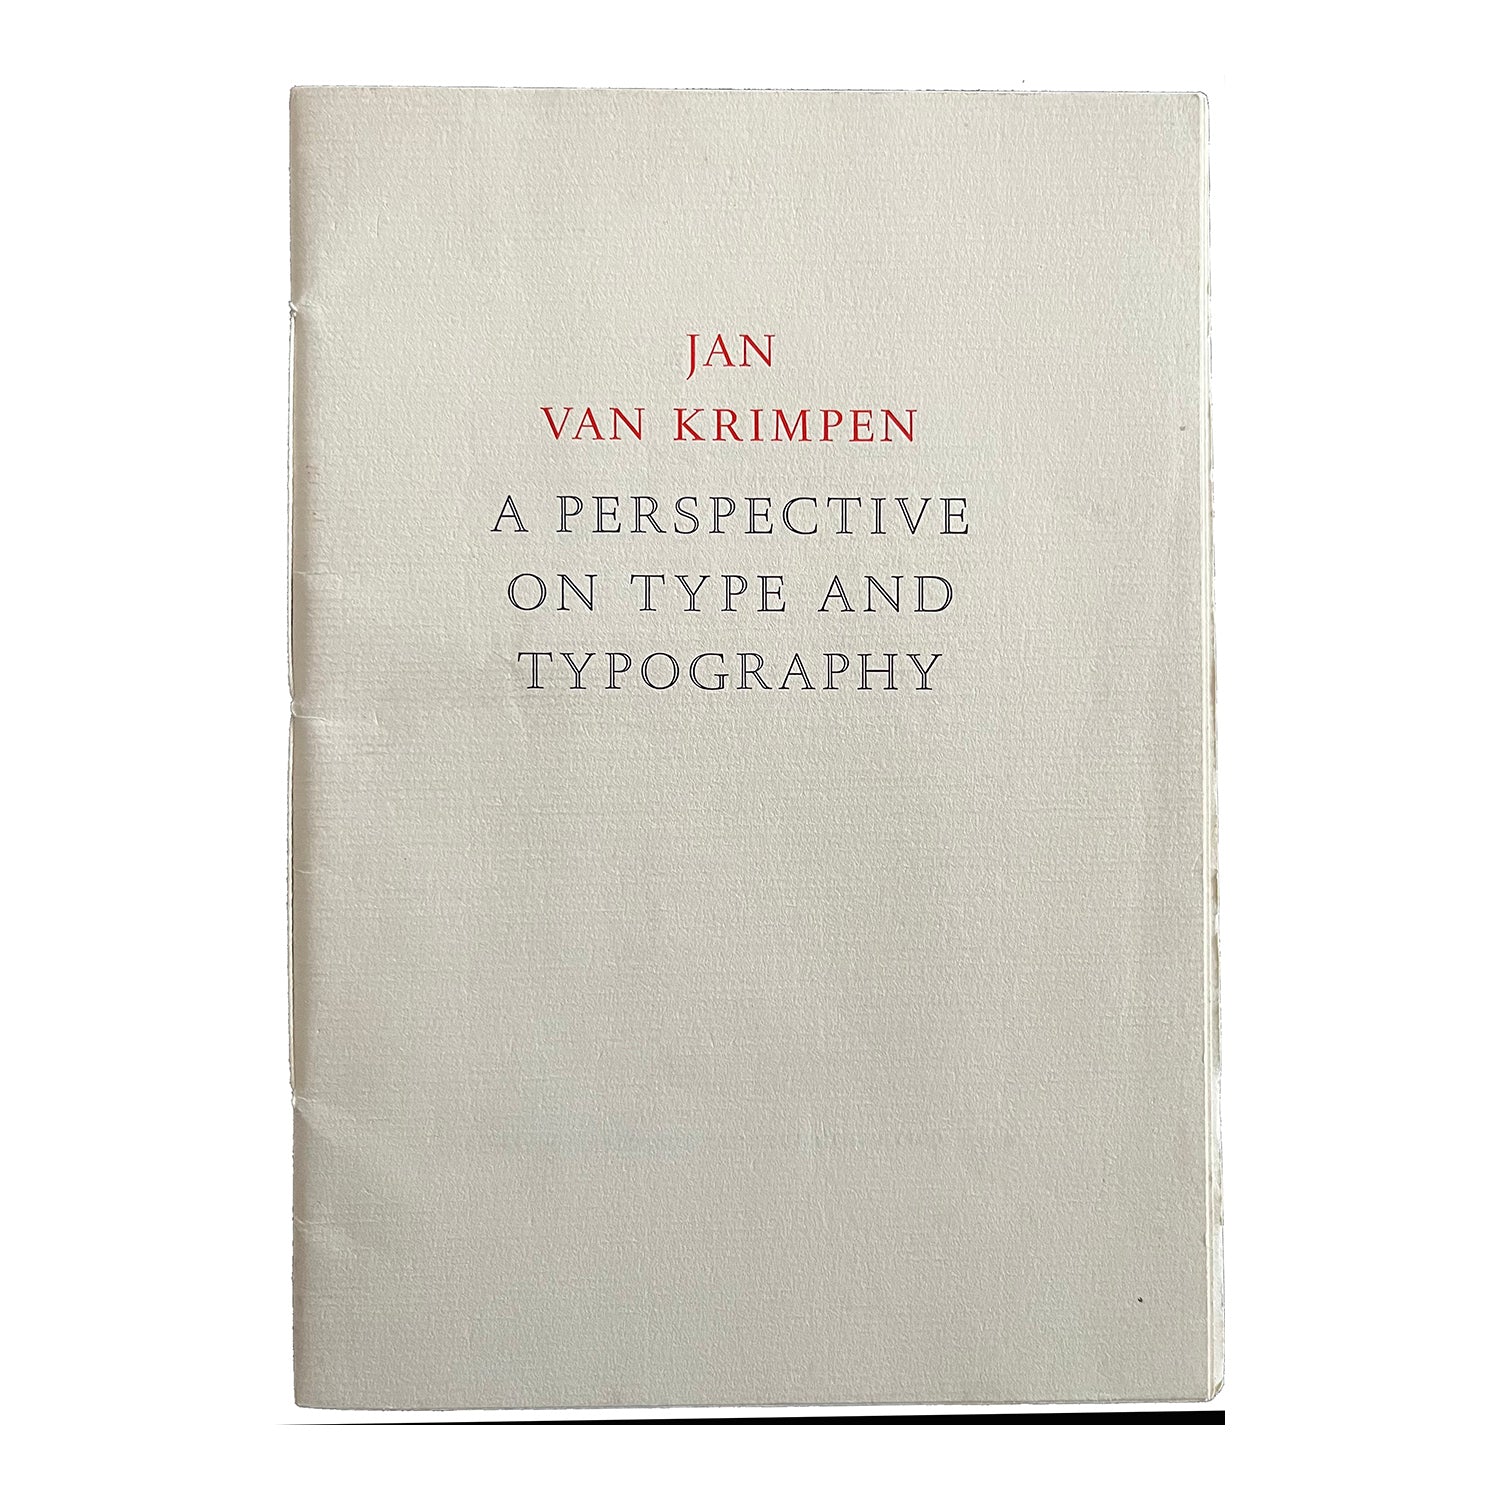 Booklet, A Perspective on Type and Typography, by Jan Van Krimpen, published by The Stinehour Press, 1965 